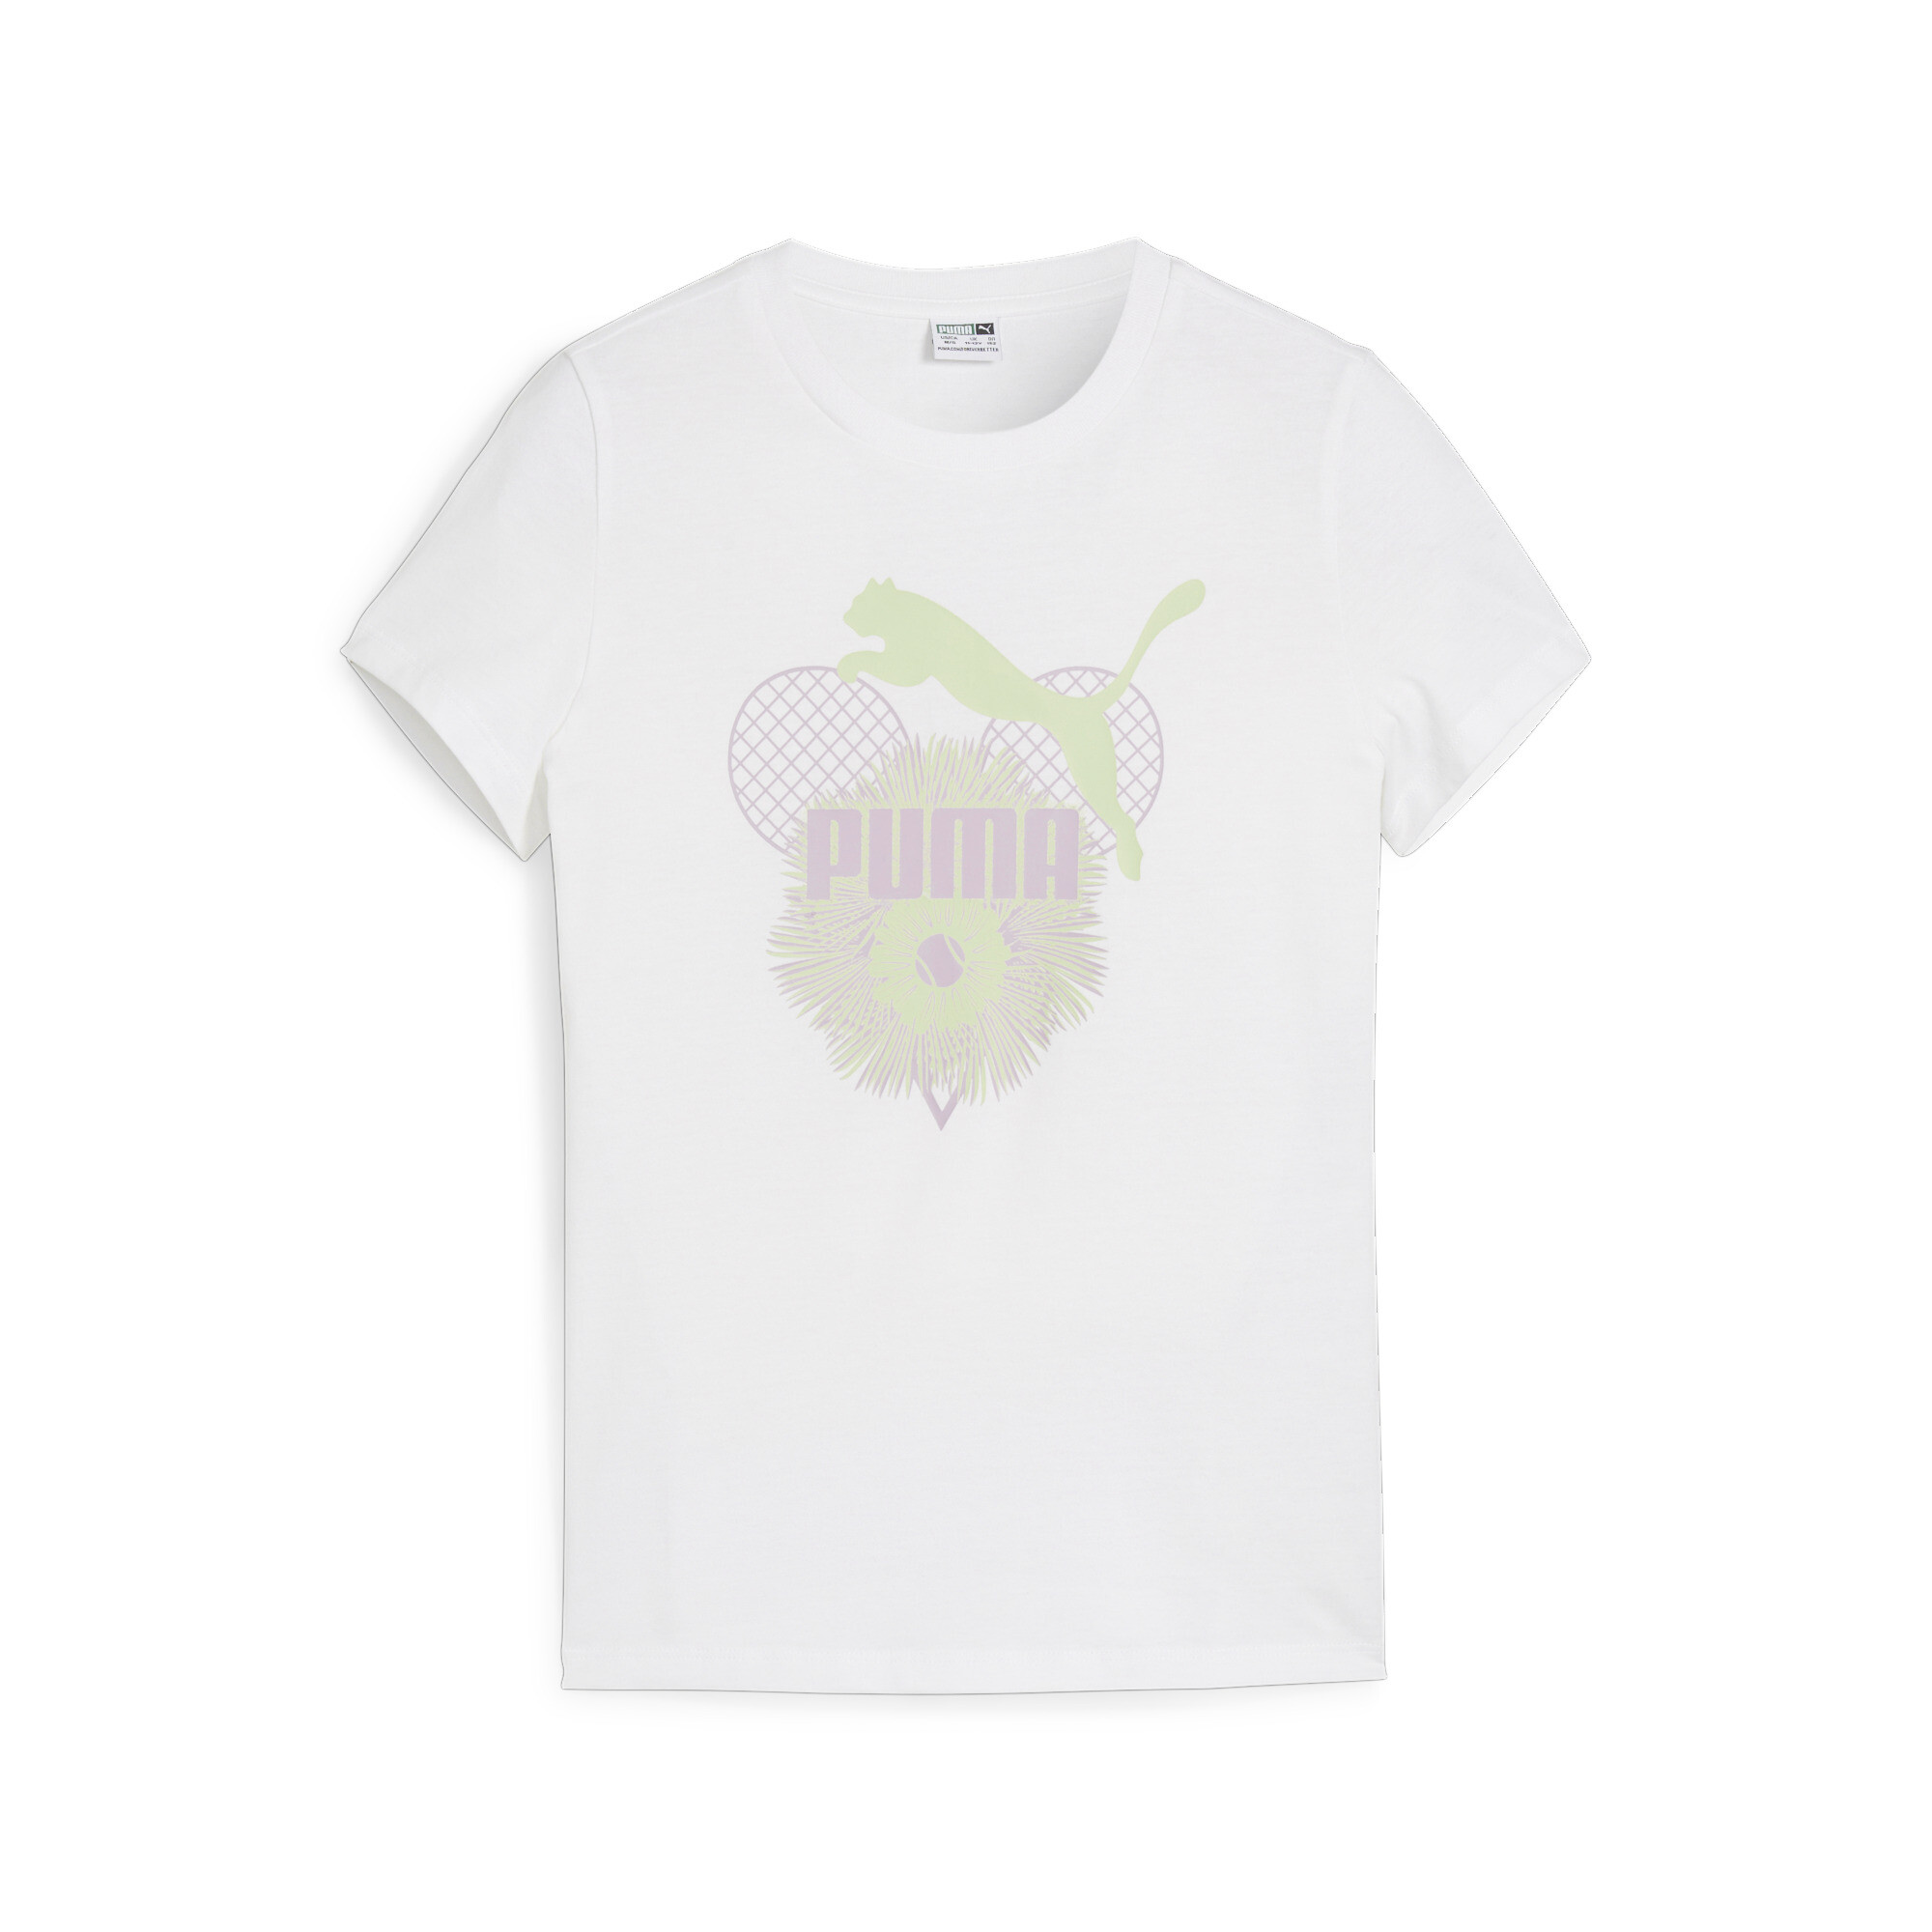 PUMA GRAPHICS MTCH PNT T-Shirt In White, Size 7-8 Youth